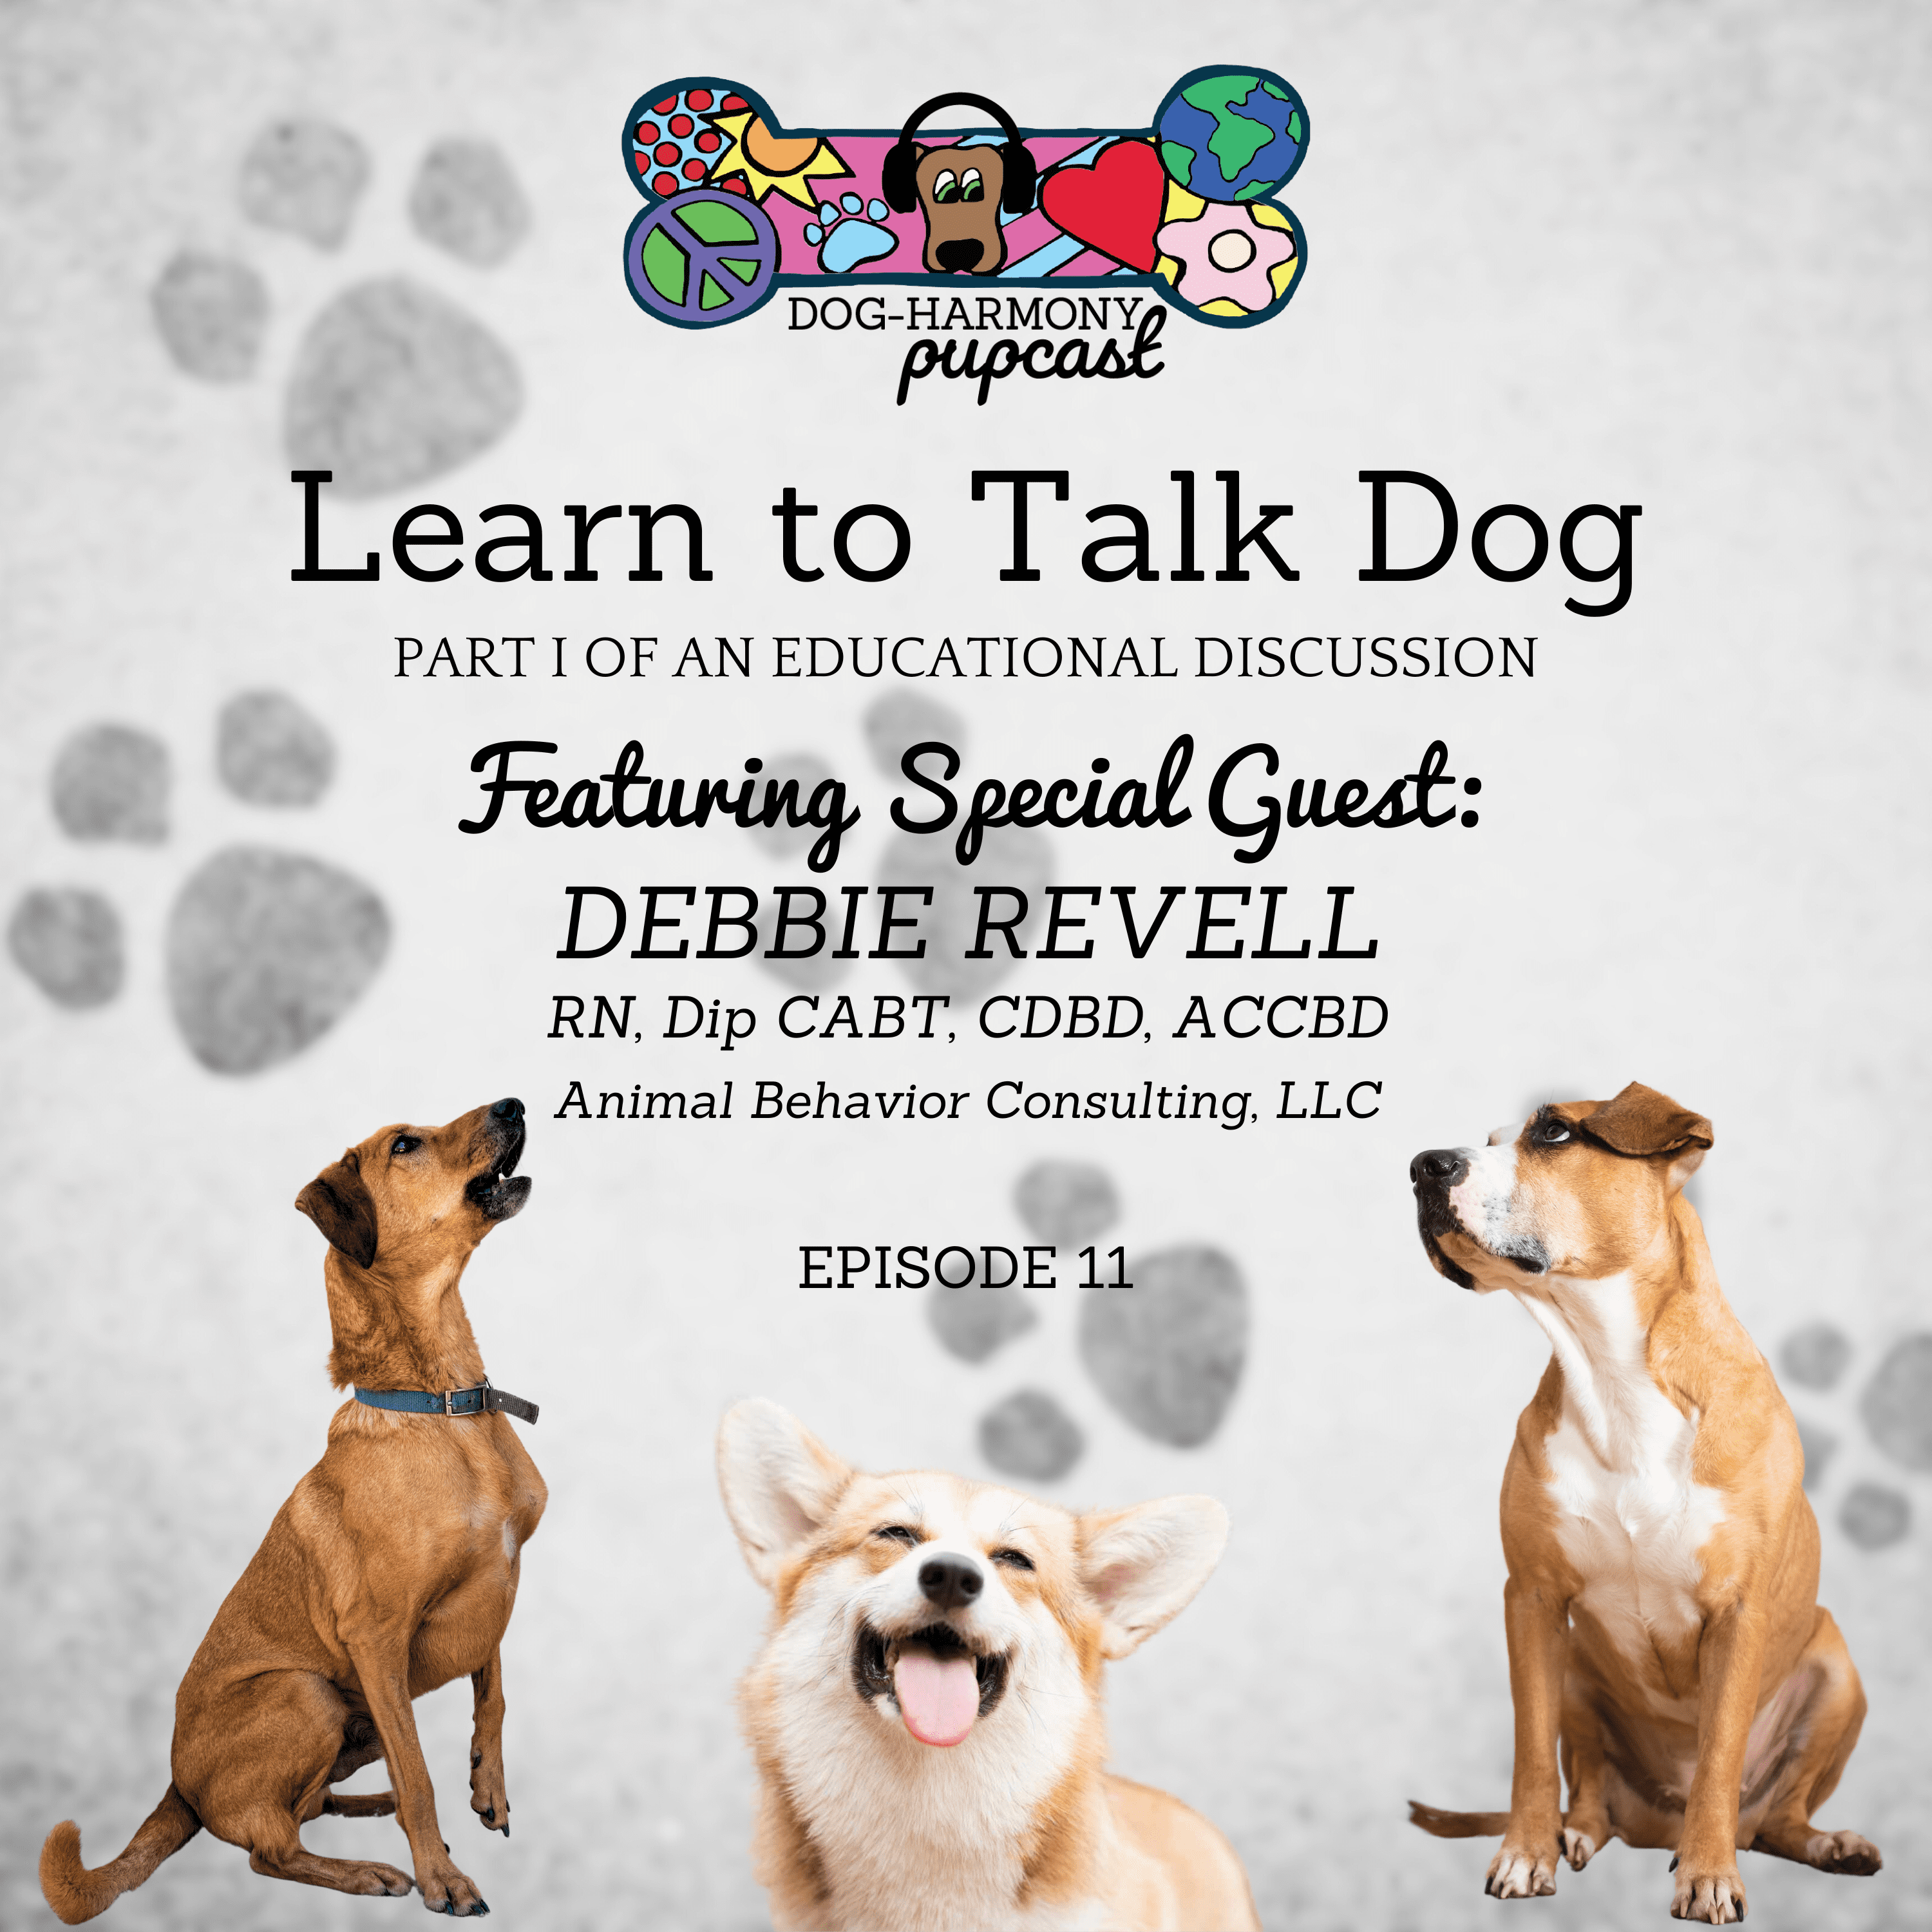 Episode 11: Learn to Talk Dog Part I Featuring Debbie Revell